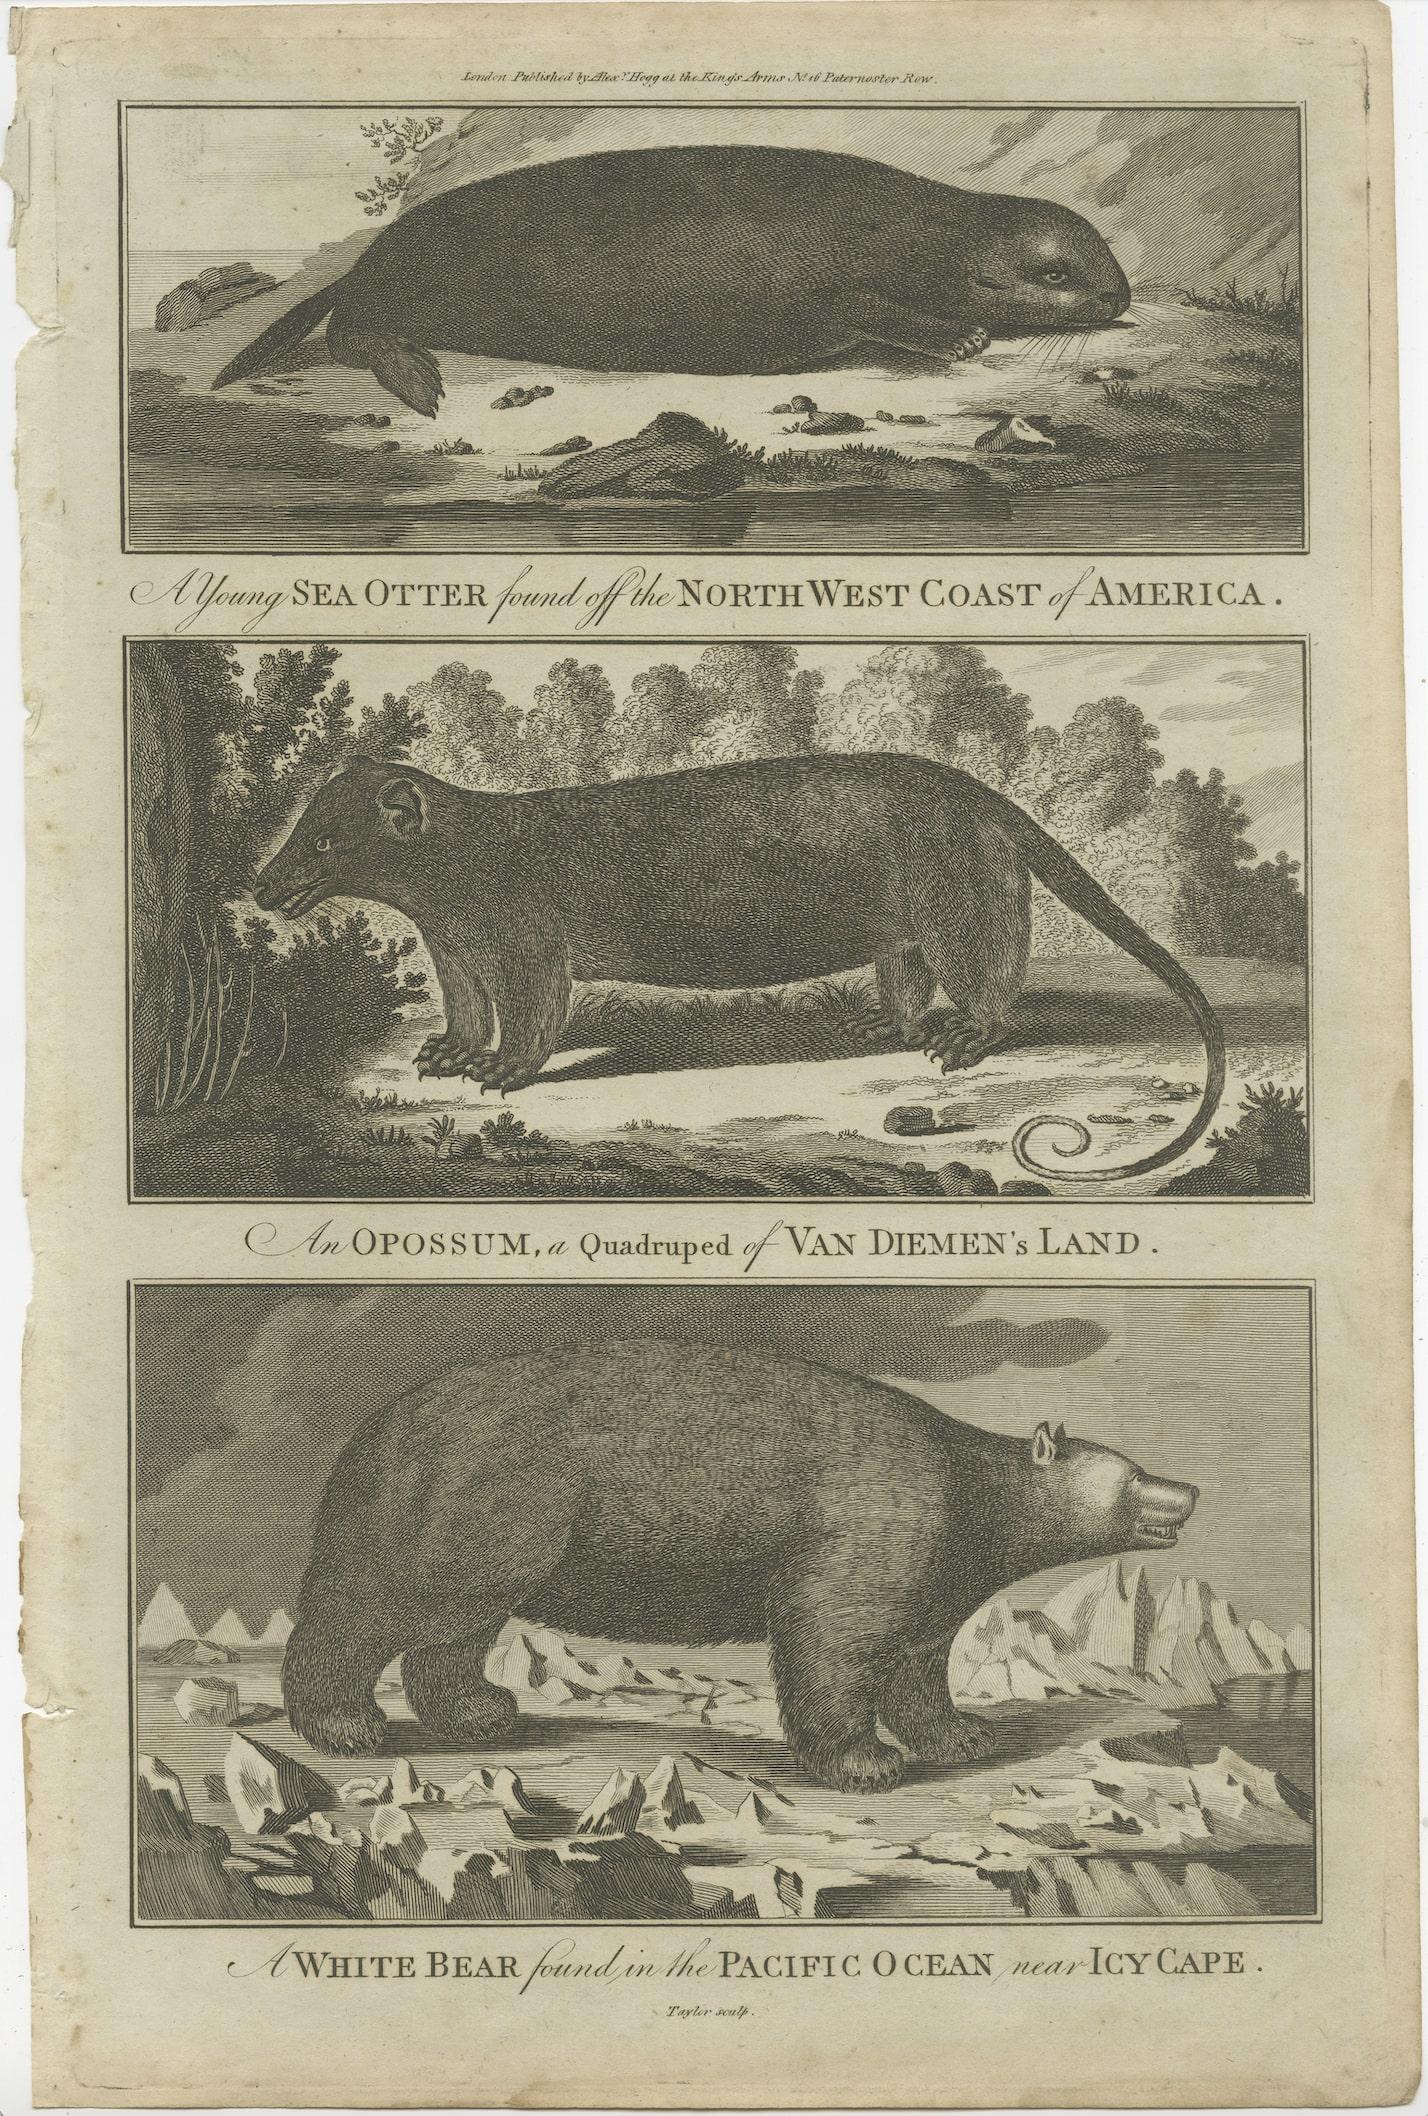 Old print of animals discovered and described during the travels of Captain Cook at different continents. Published by Alex Hogg at The Kings Arms, no.16 Paternoster Row.

All kinds of exotic animals were observed and depicted by the artists on